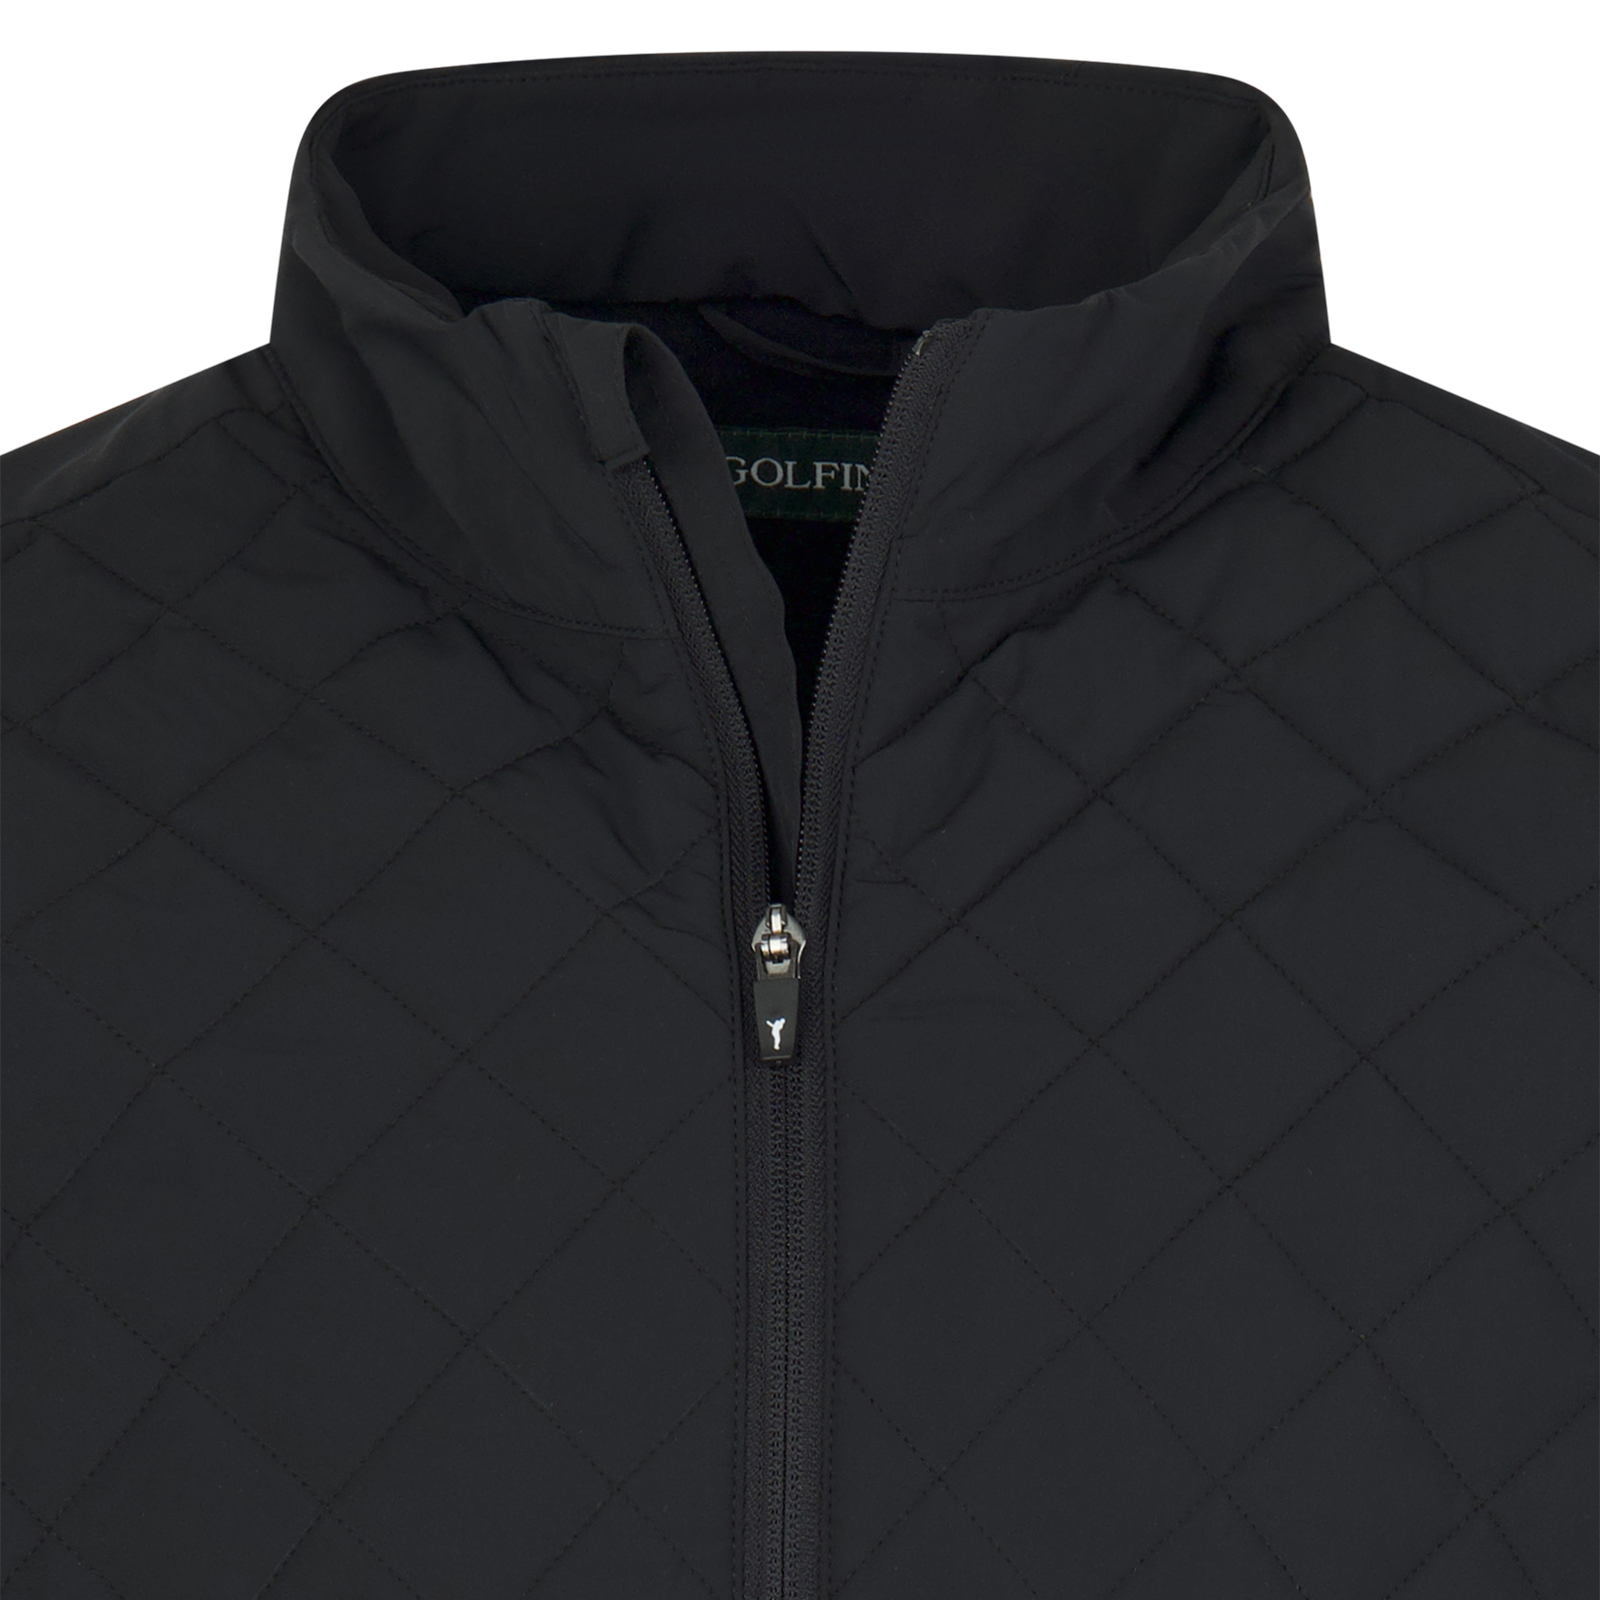 Men's golf jacket with triple function